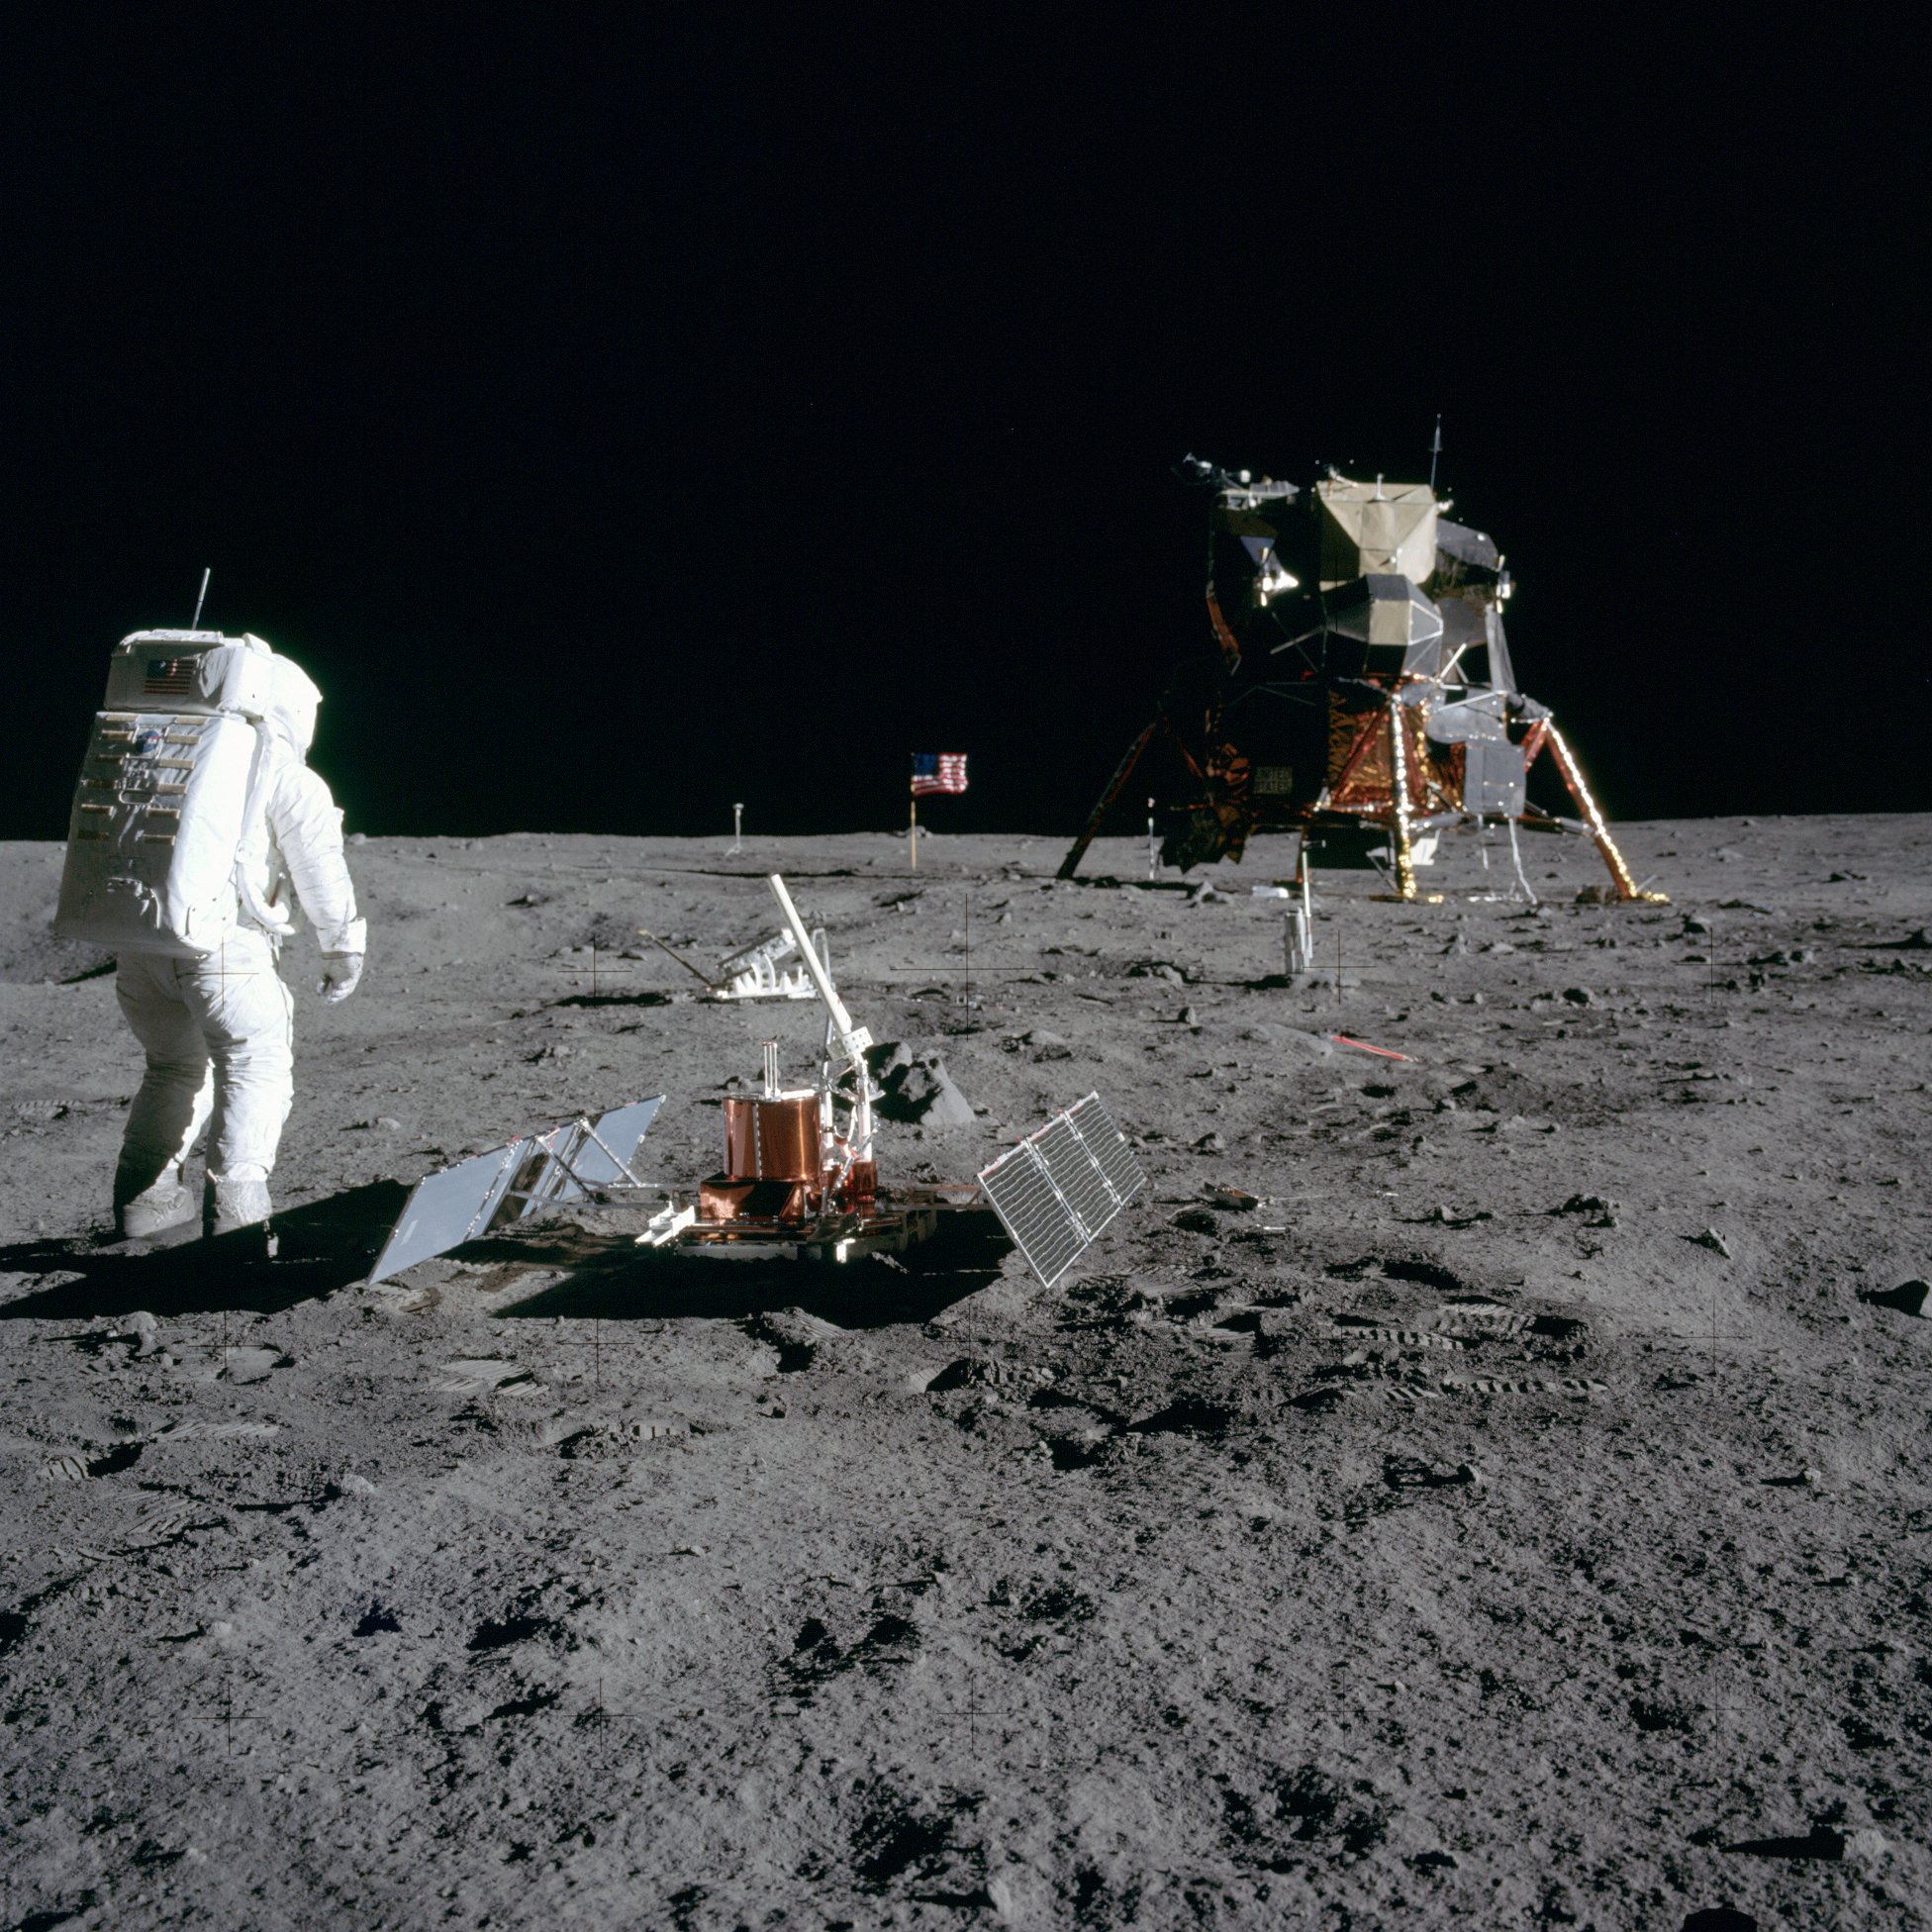 A photo of the deployed PSEP equipment, showing Buzz Aldrin and the Lunar Exploration Module in the background.